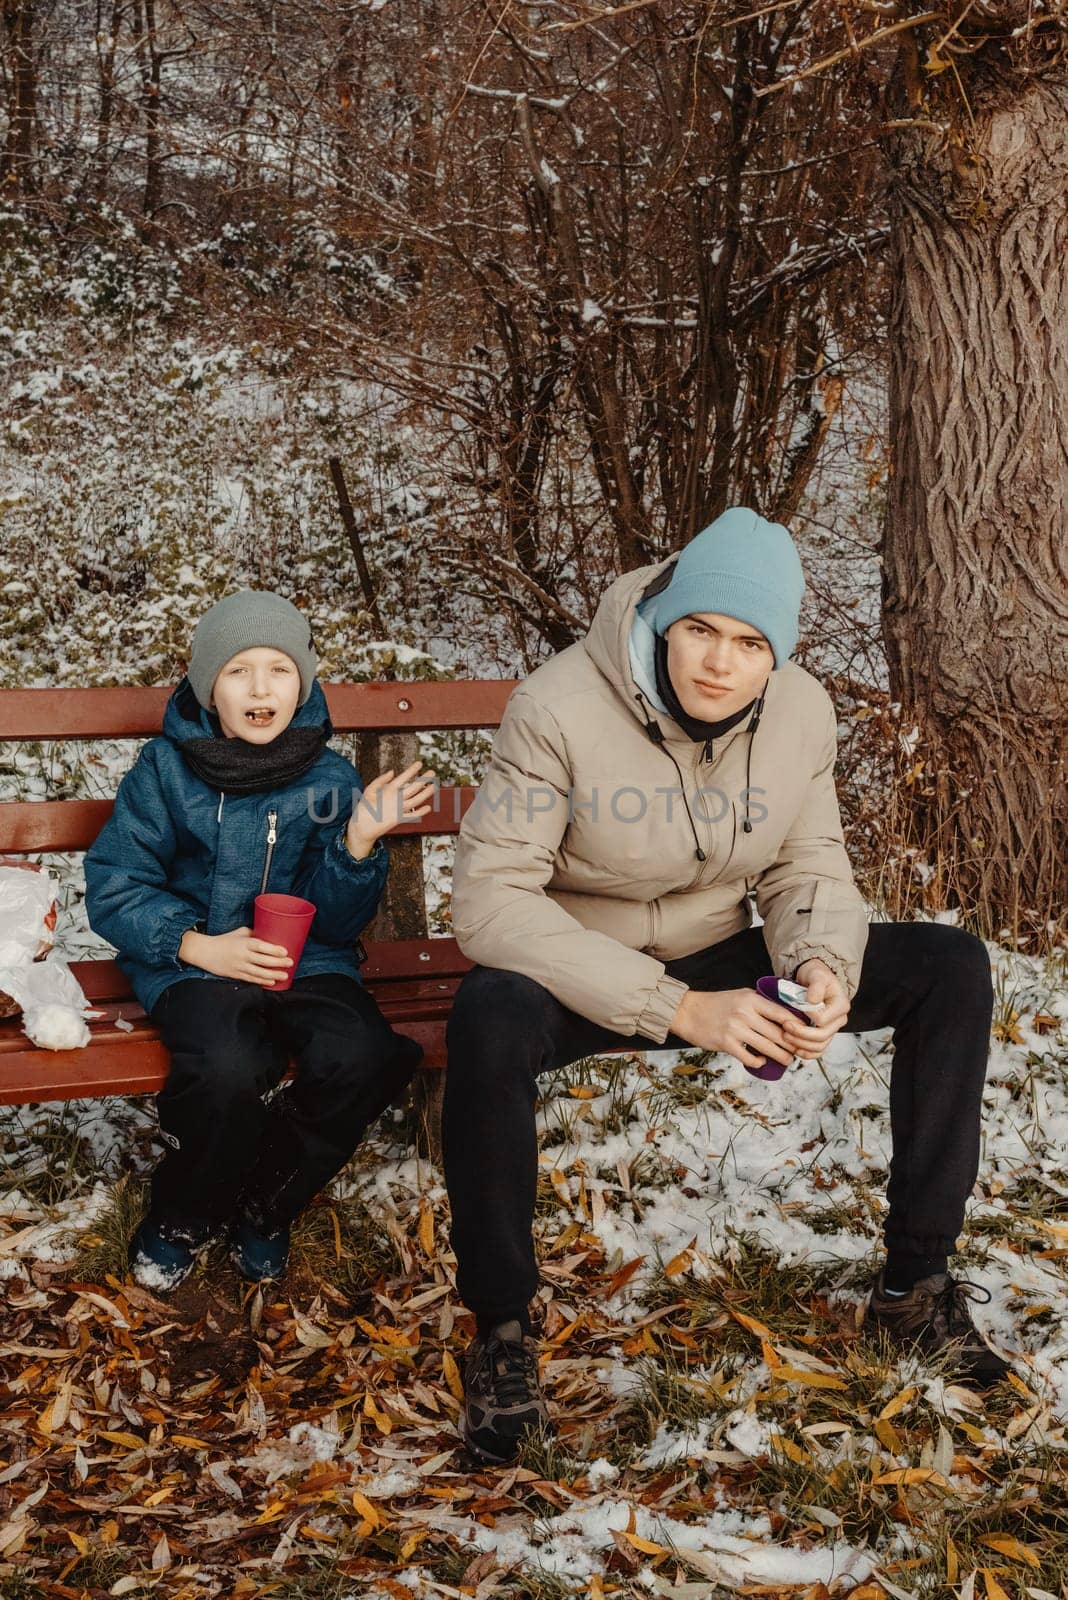 Winter Bonding: Brothers, Aged 8 and 17, Enjoying Tea on Snow-Covered Bench in Rural Park by Andrii_Ko